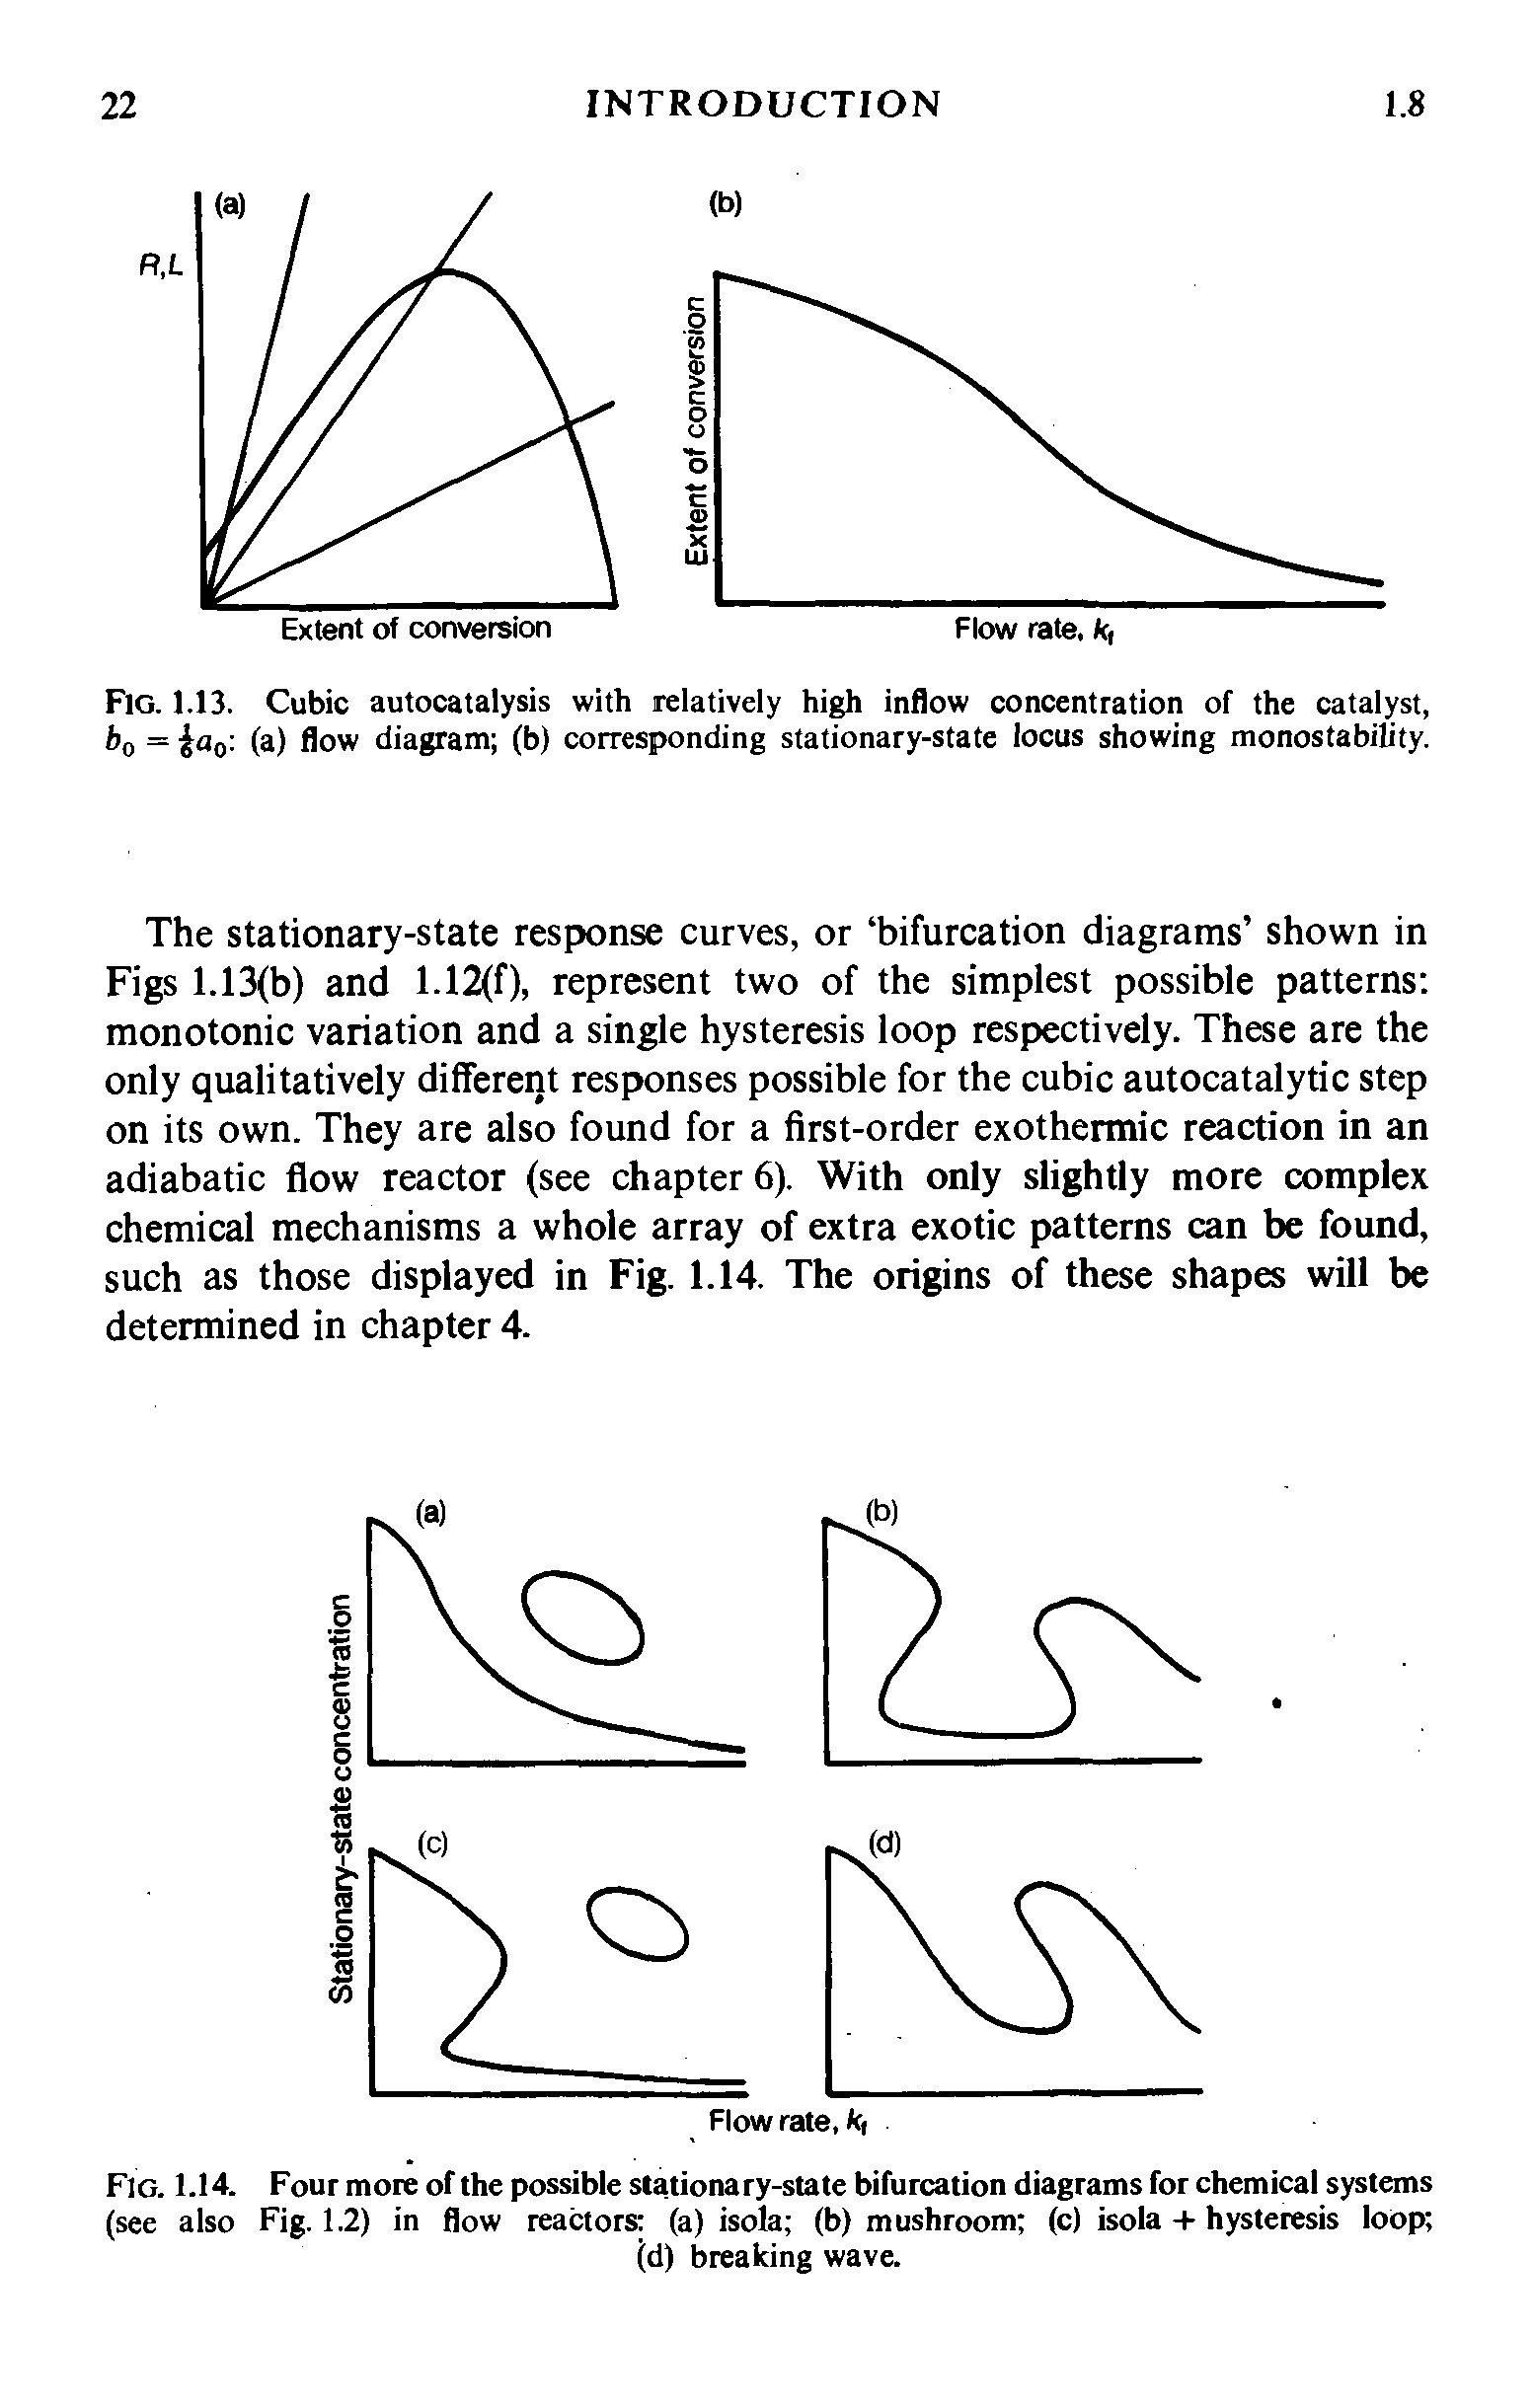 Fig. 1.14. Four more of the possible stationary-state bifurcation diagrams for chemical systems (see also Fig. 1.2) in flow reactors (a) isola (b) mushroom (c) isola + hysteresis loop ...